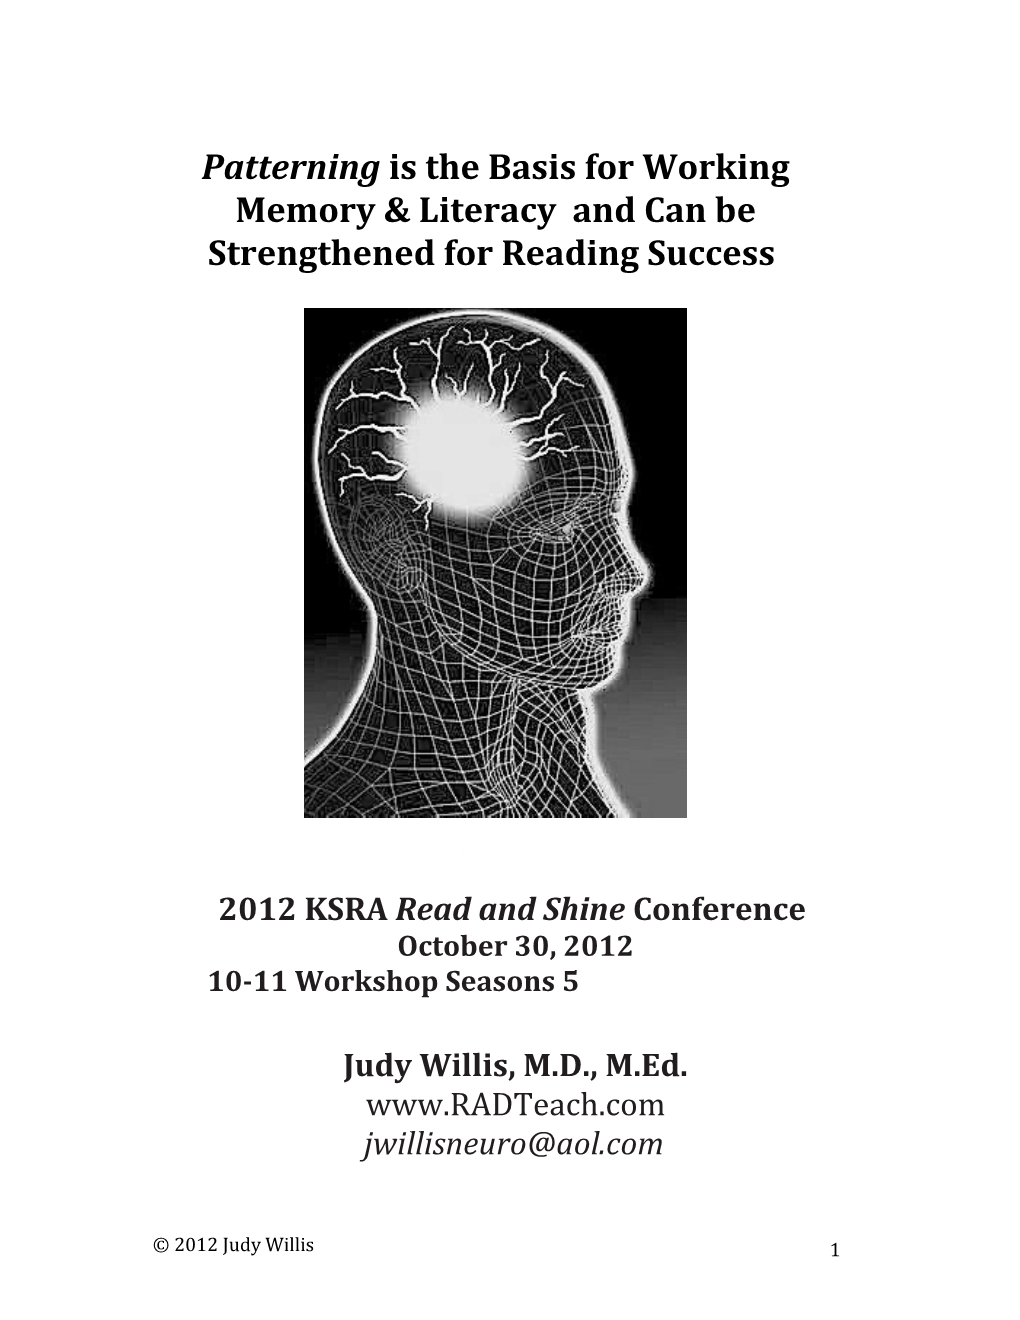 Patterning Is the Basis for Working Memory & Literacy and Can Be Strengthened for Reading